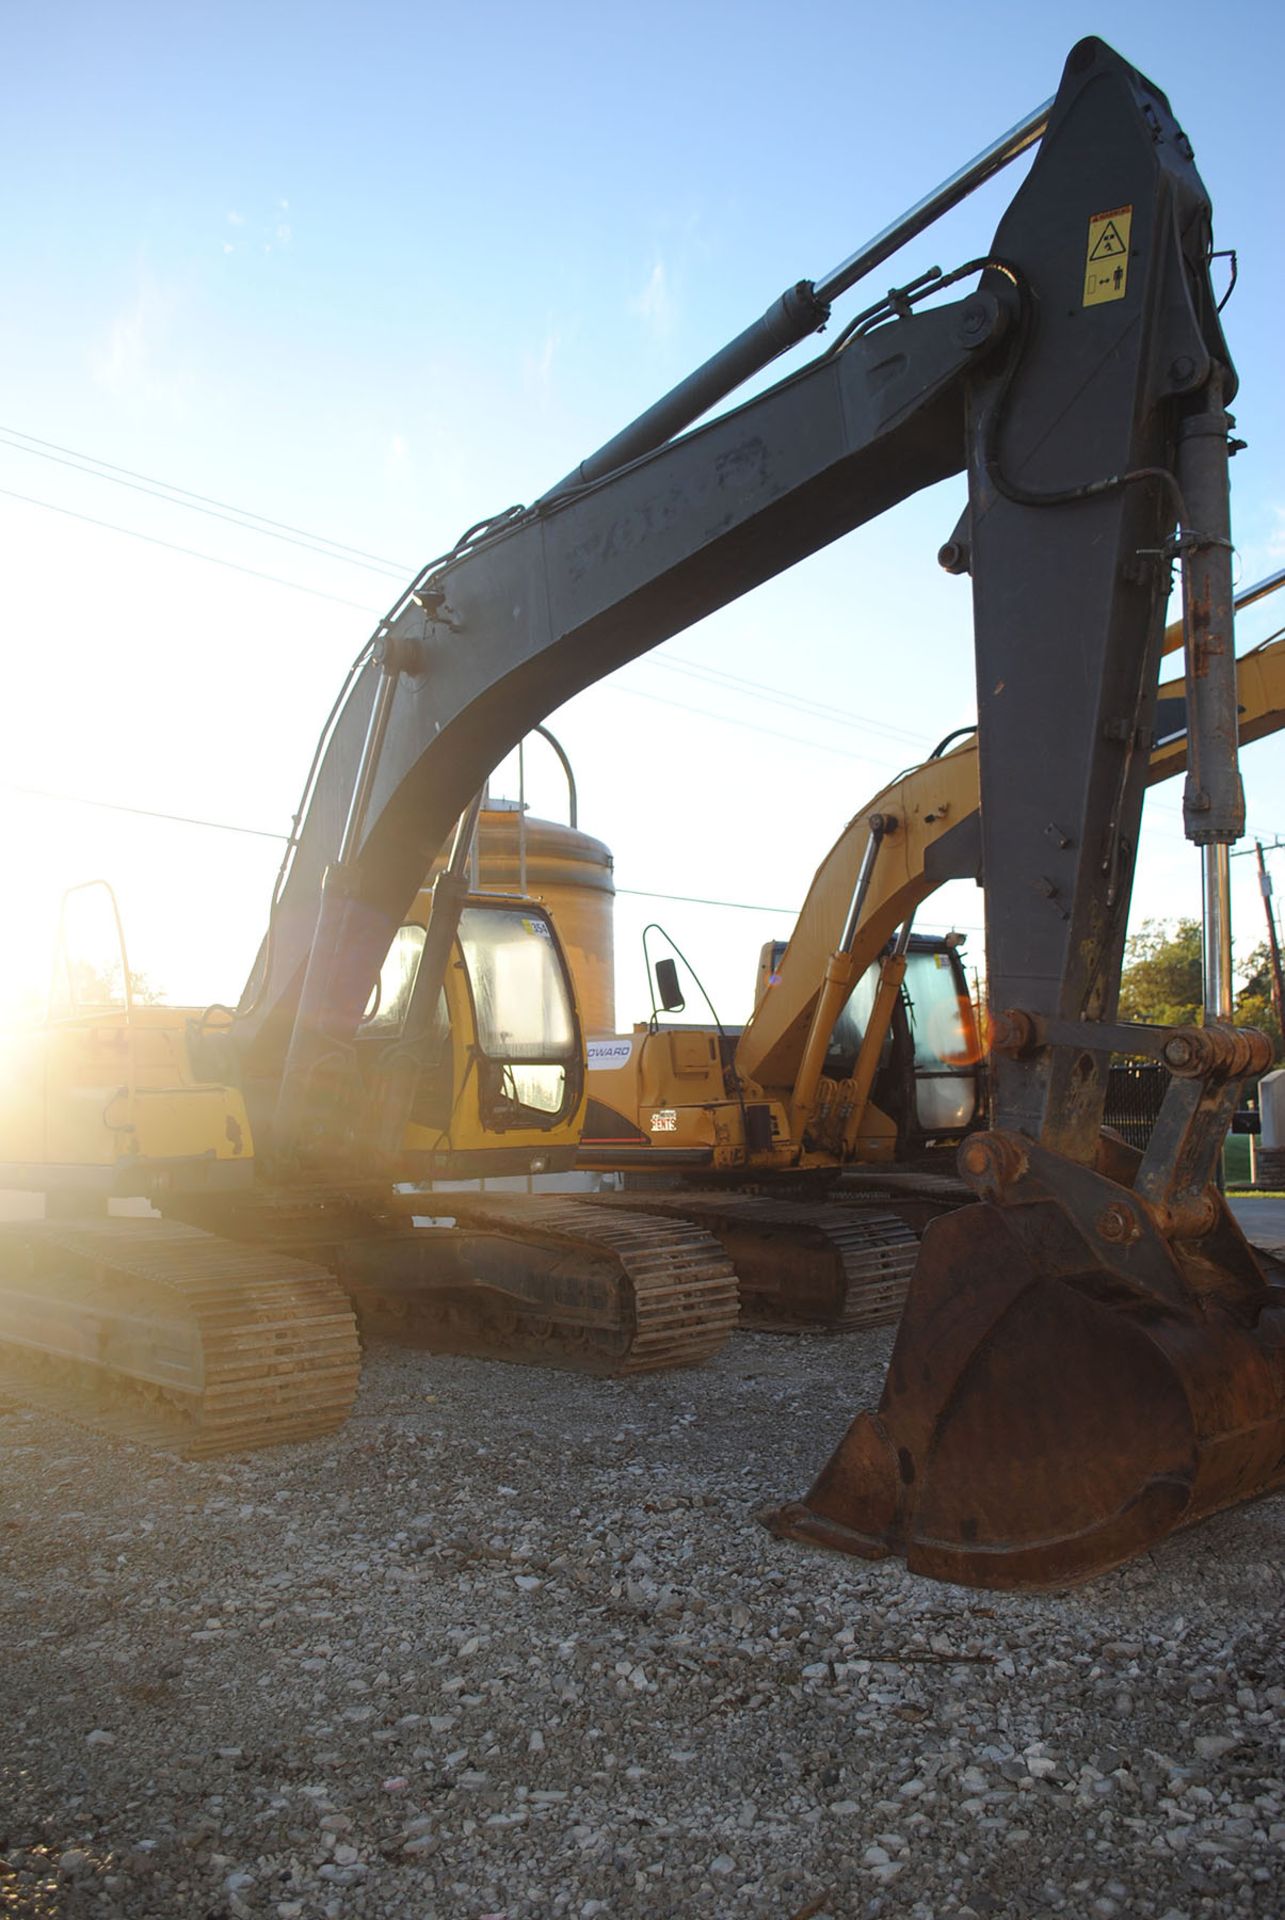 2001 VOLVO E290LC HYDRAULIC EXCAVATOR; PIN EC2906LCC-03657, 10,500 COUNTERWEIGHT, ENCLOSED CAB - Image 3 of 6